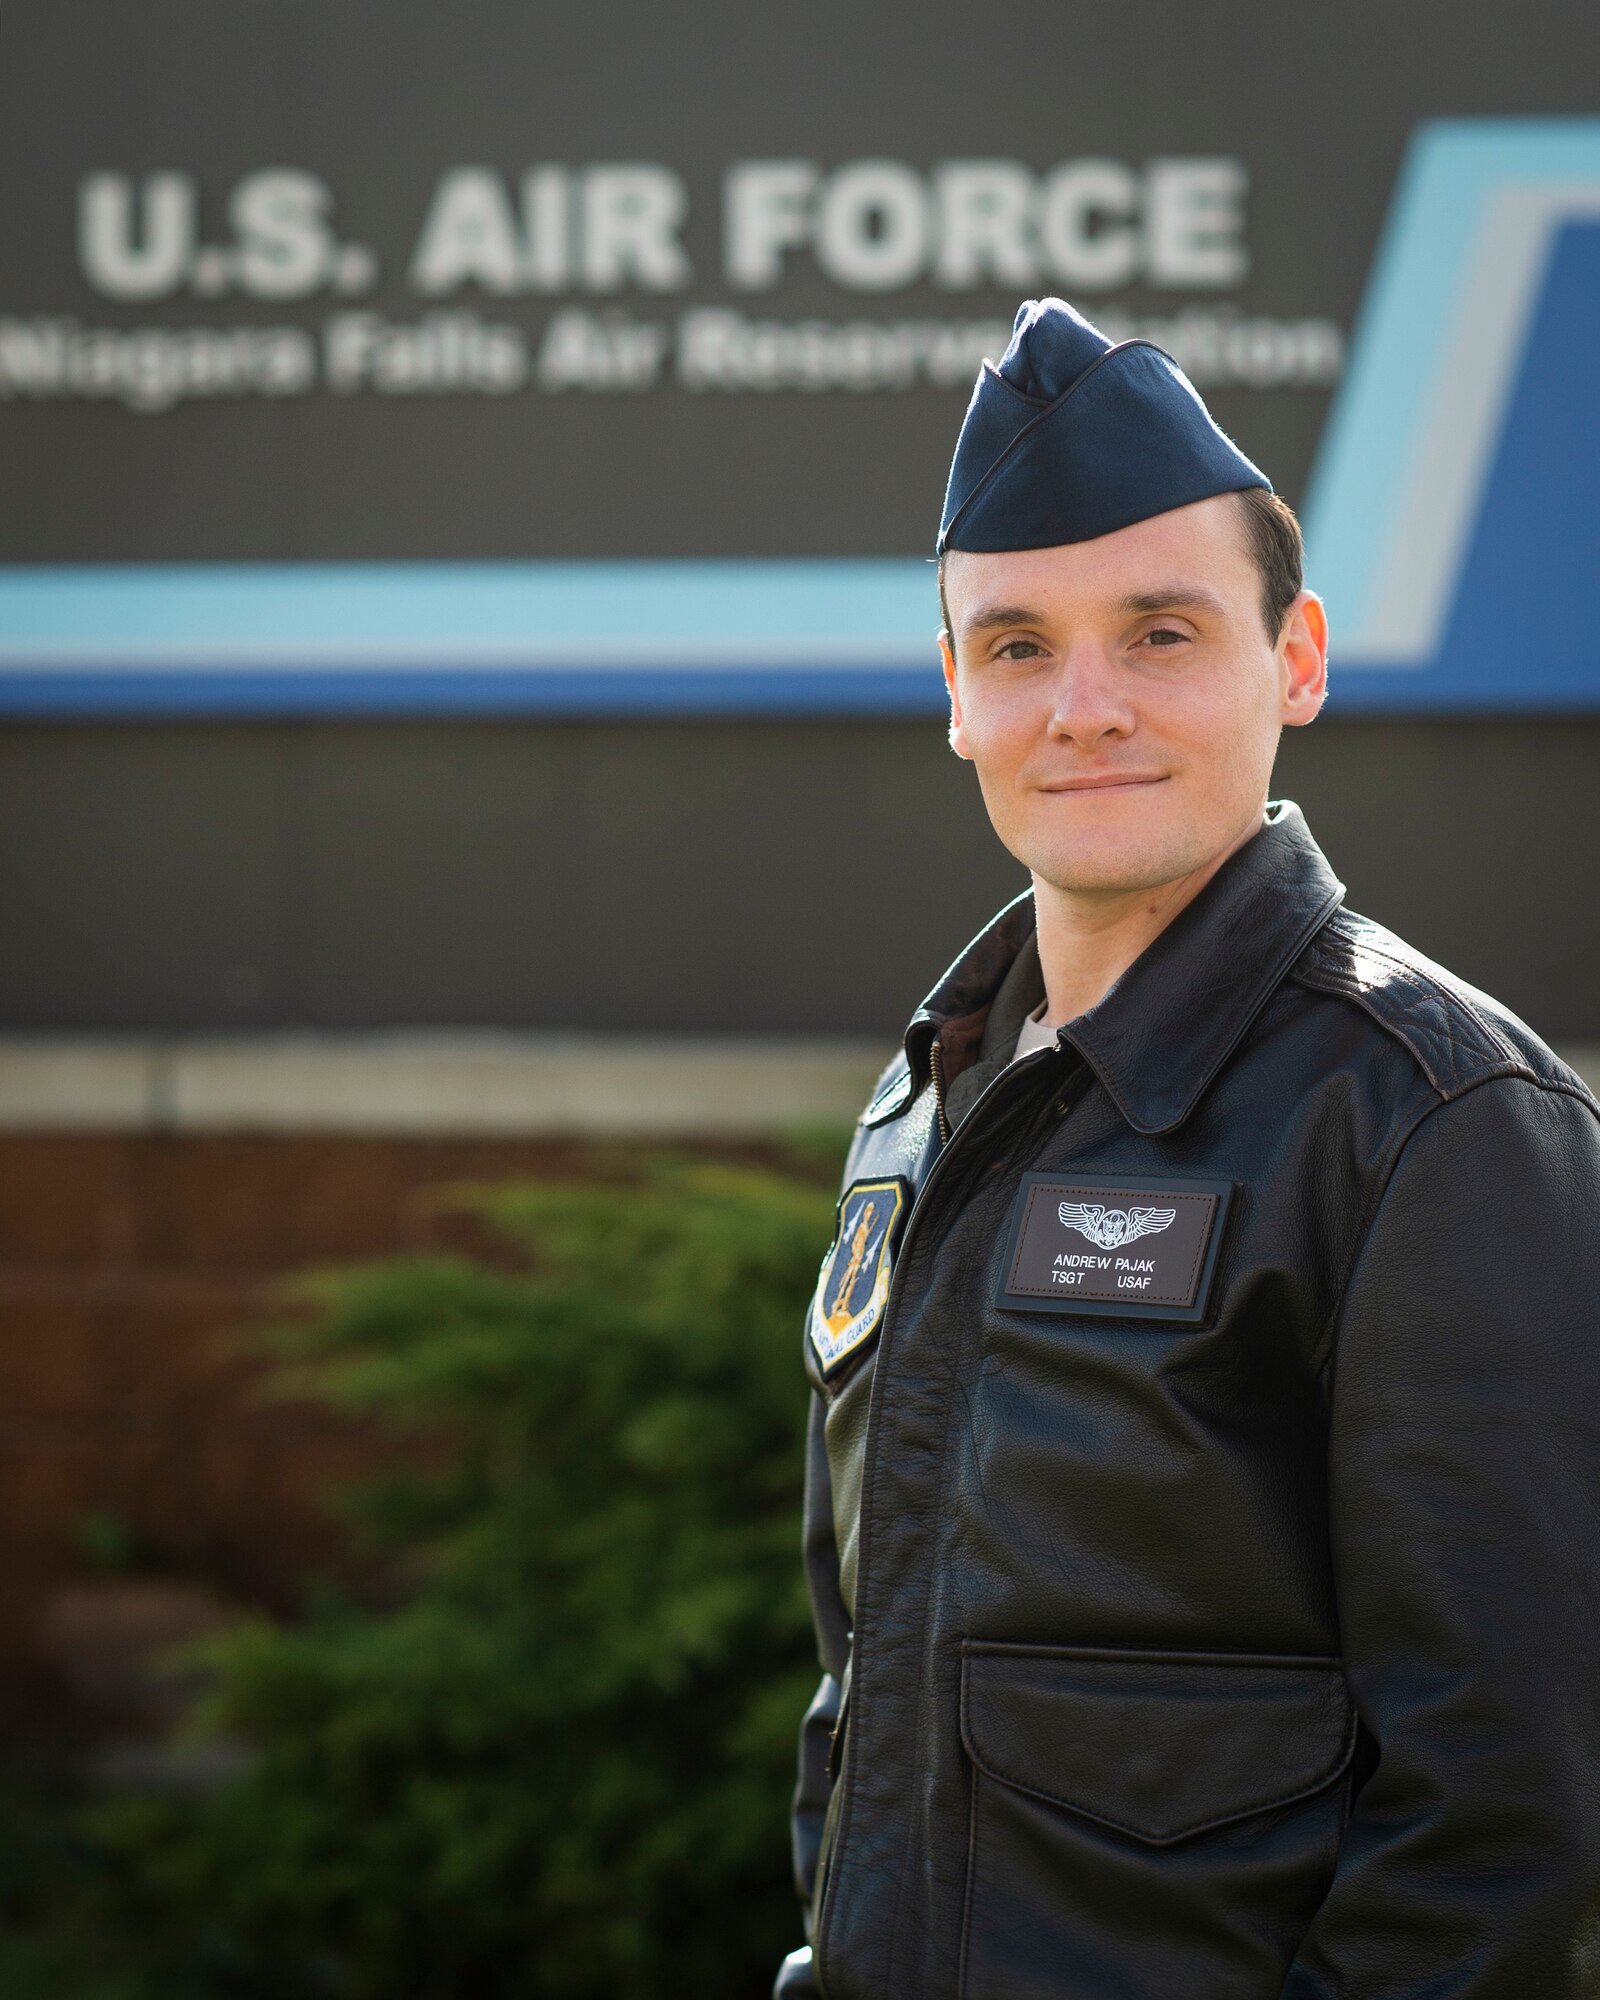 Tech. Sgt. Andrew Pajak, an MQ-9 sensor operator assigned to the 107th Operations Group, 107th Attack Wing, New York Air National Guard, Niagara Falls, N.Y., poses for a photo upon his return to home station. Pajak was joined by two other Airmen assigned to the 107th serving as guest help for the 163rd Attack Wing, California Air National Guard, March Air Force Base, Calif., in response to a state of emergency declared due to the wildfires. The team spent several months providing skills to protect lives and property and to preserve peace, order and public safety for the residents of the state of California. (U.S. Air National Guard photo by Master Sgt. Brandy Fowler)